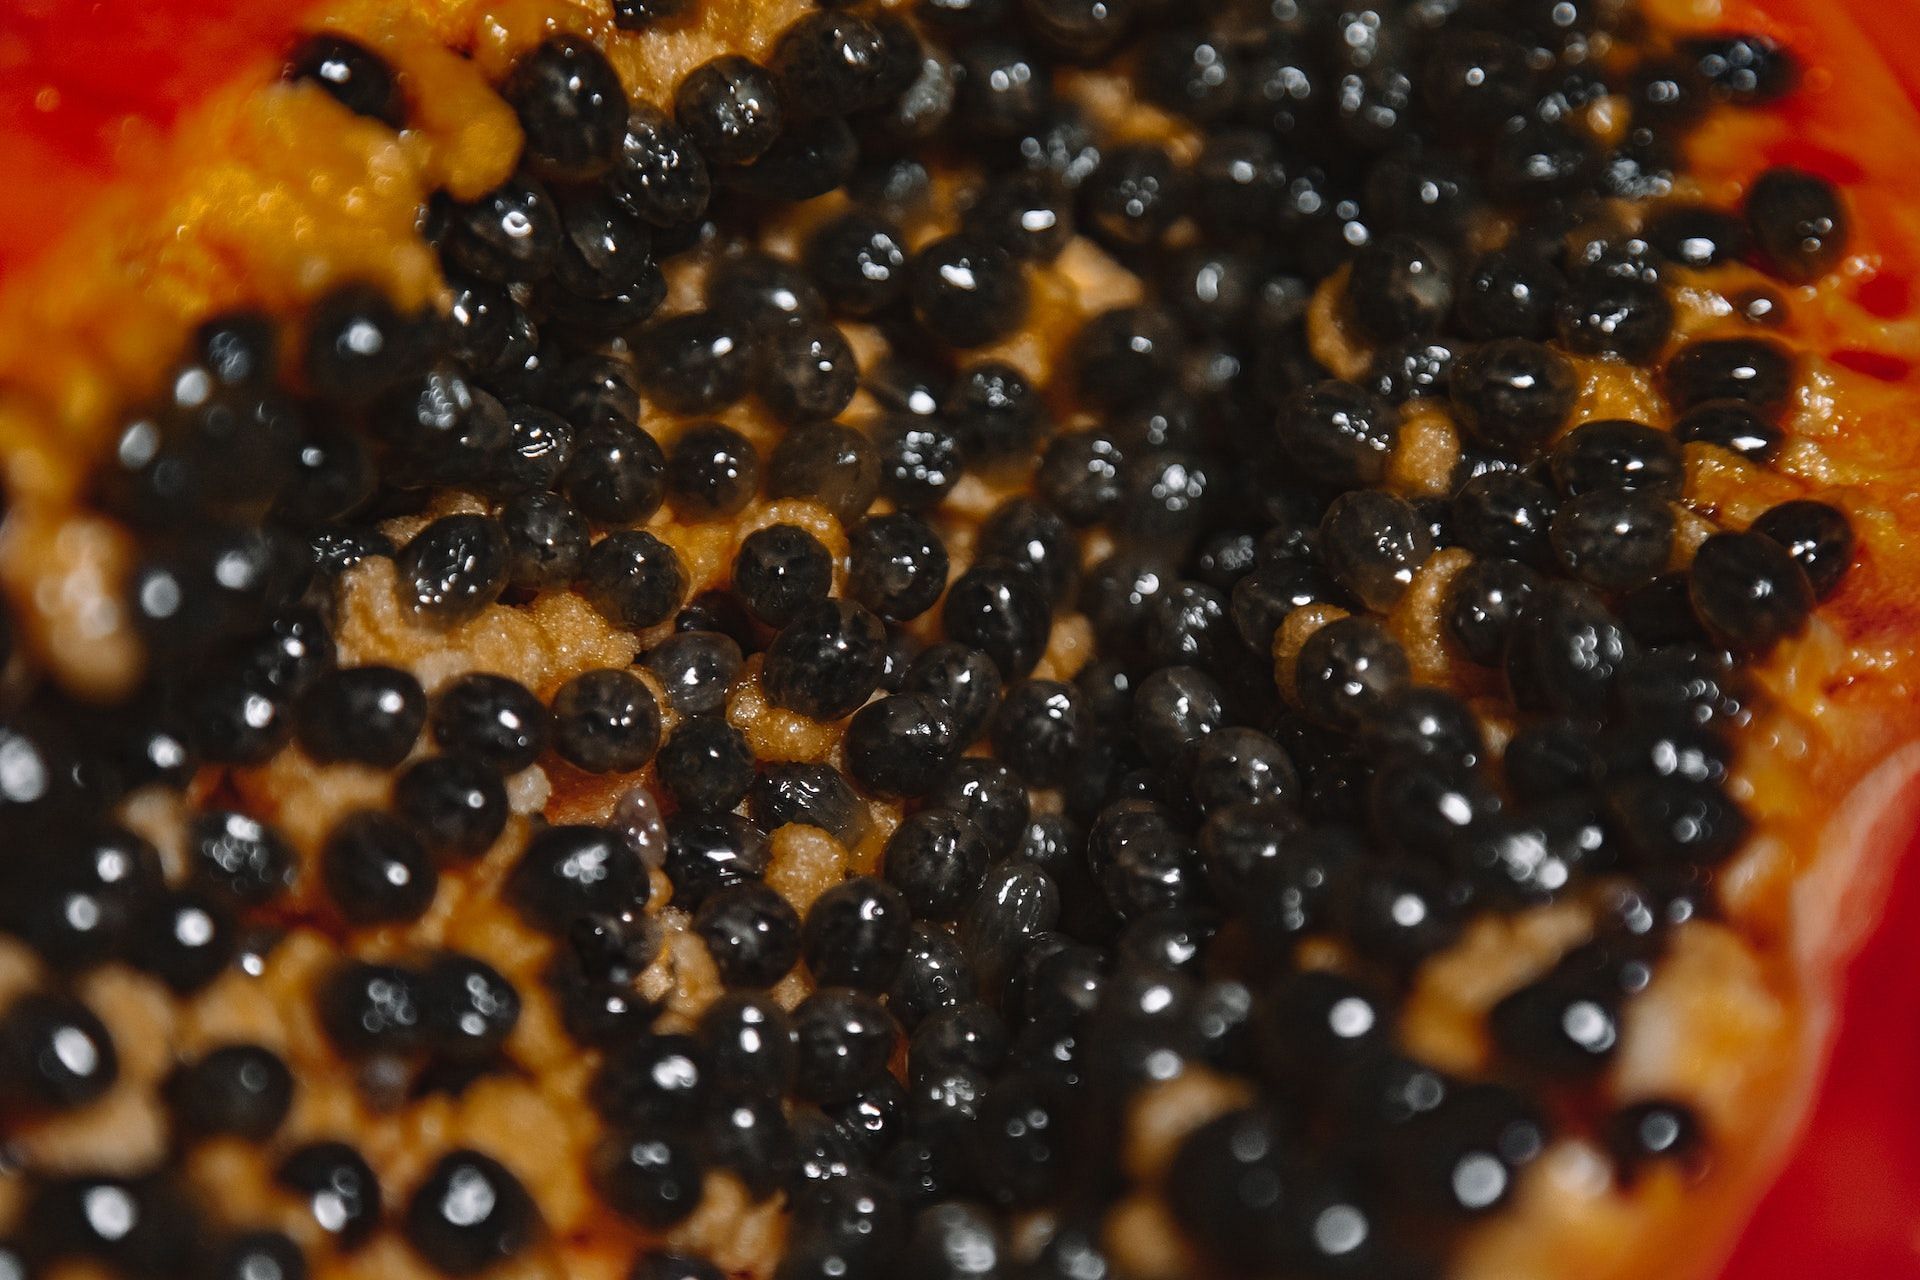 Papaya seeds can also be used as black pepper in food items (Photo by ROMAN ODINTSV/pexels)